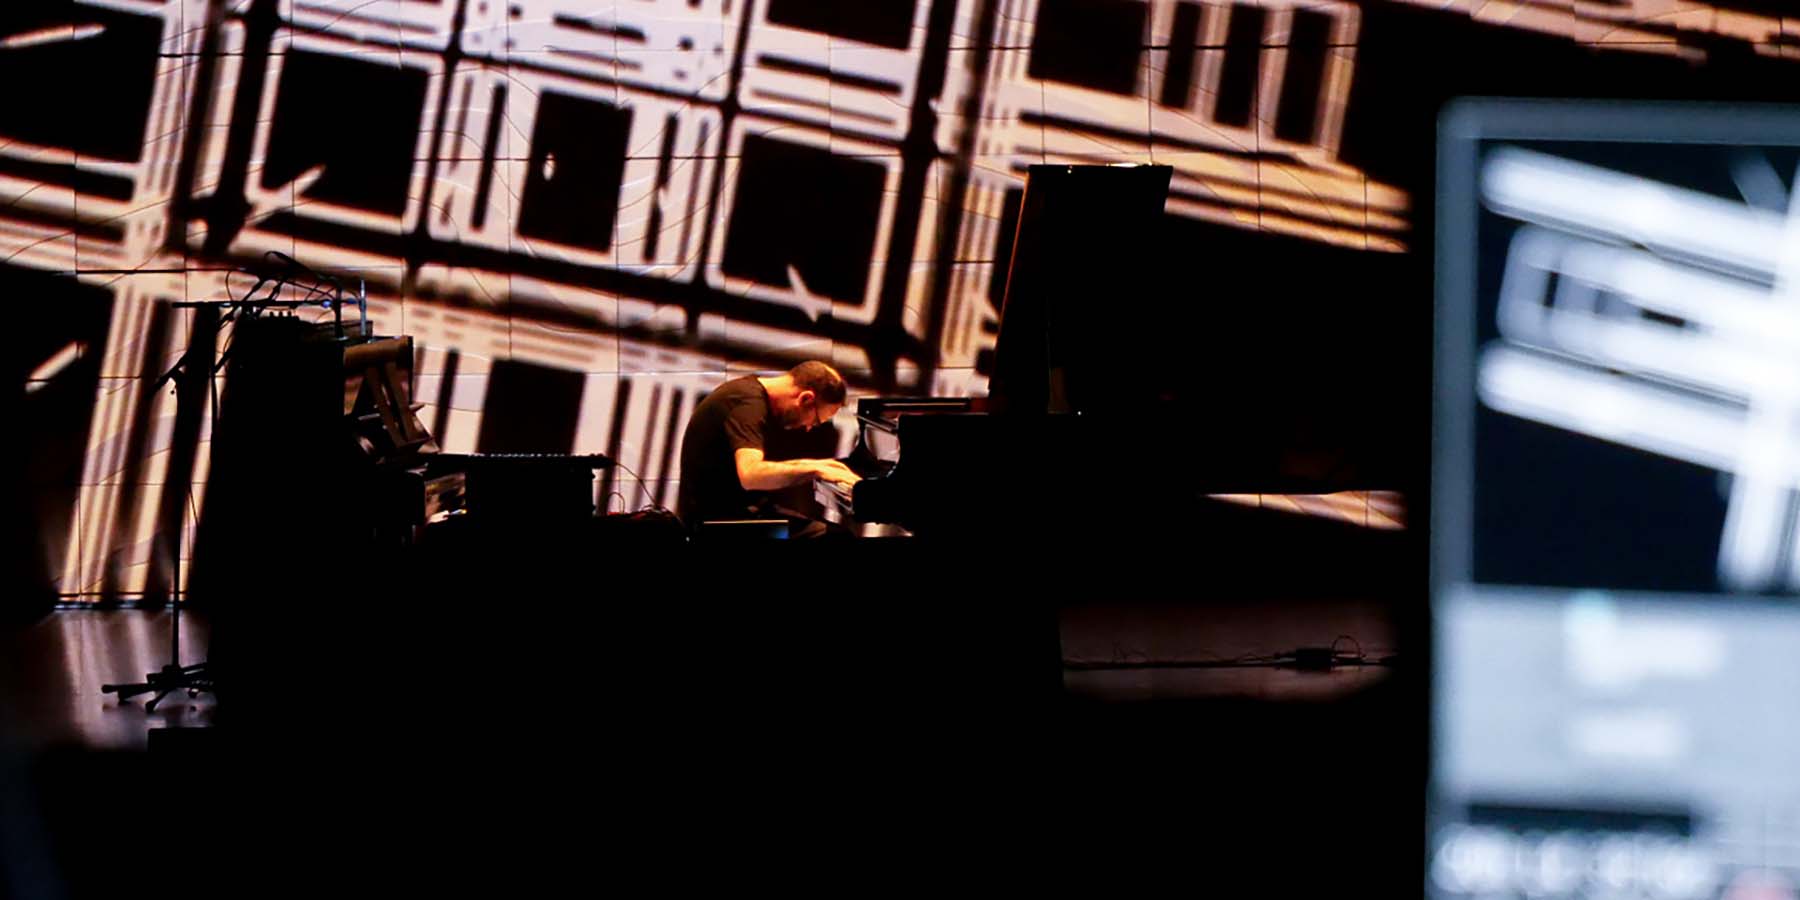 Luke Howard performing within an immersive digital experience at Melbourne Recital Centre.